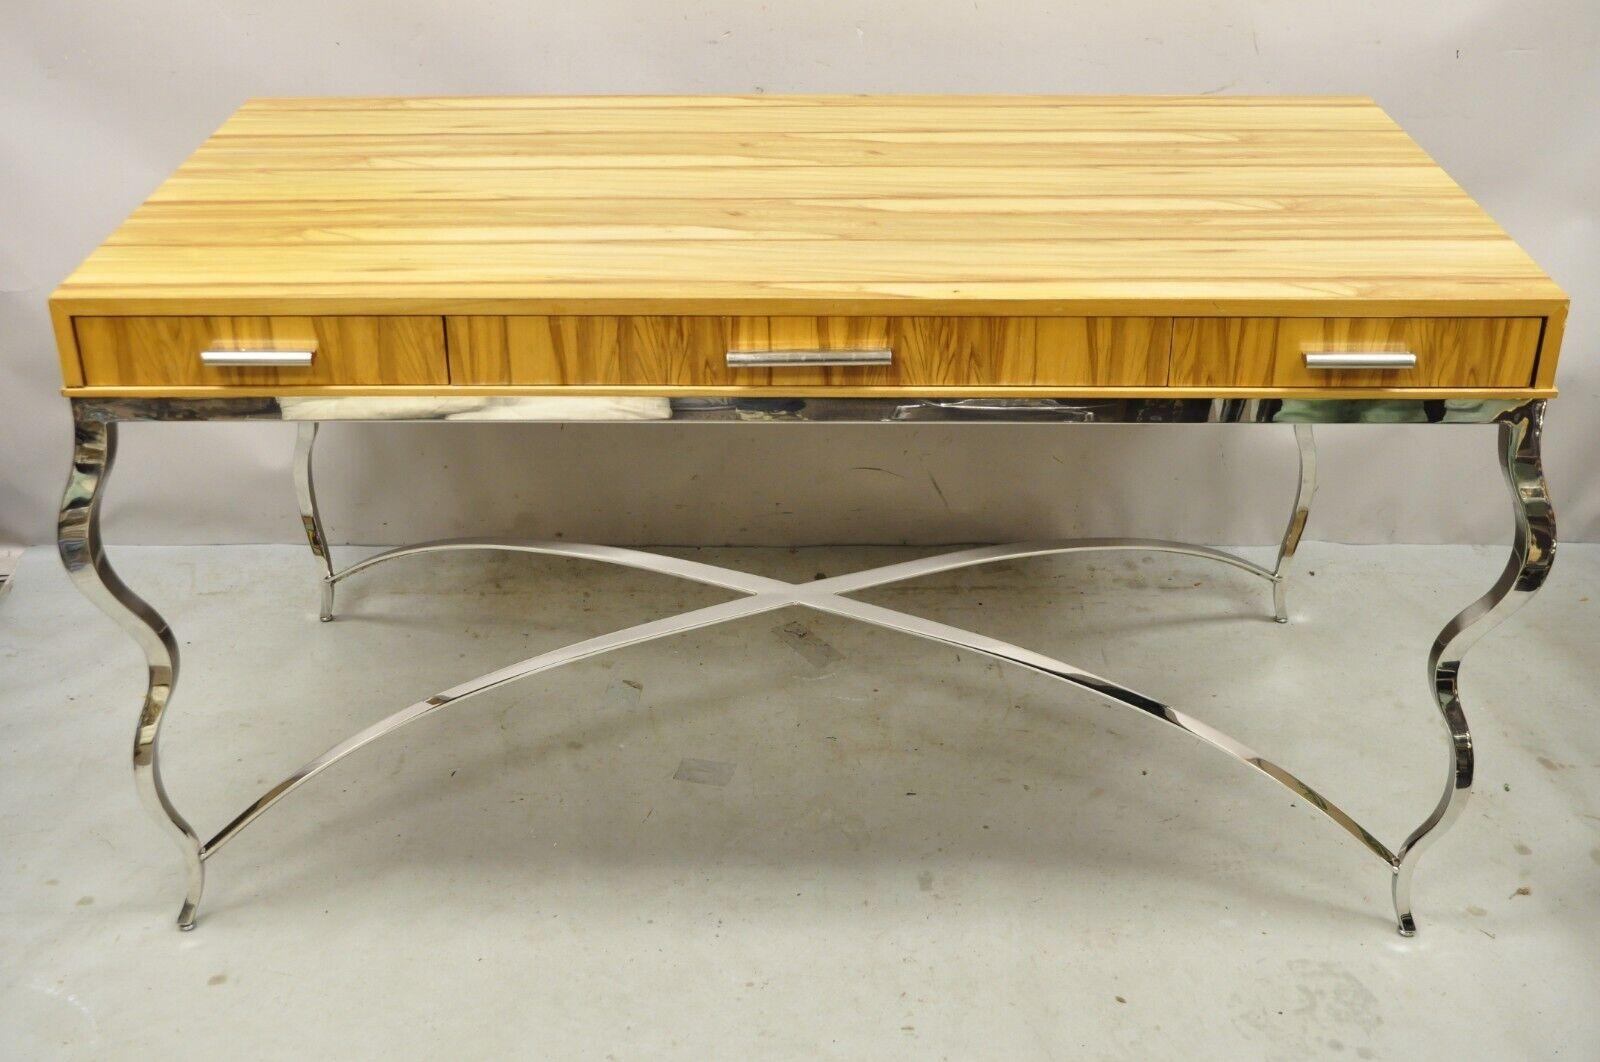 Century Furniture Modern Chrome and Zebra Wood Metal Base Desk Table 849-761. Item features 3 drawers, original label, sculptural metal stretcher base, beautiful laminate wood grain, great style and form. Circa 21st Century. Measurements: 30.25